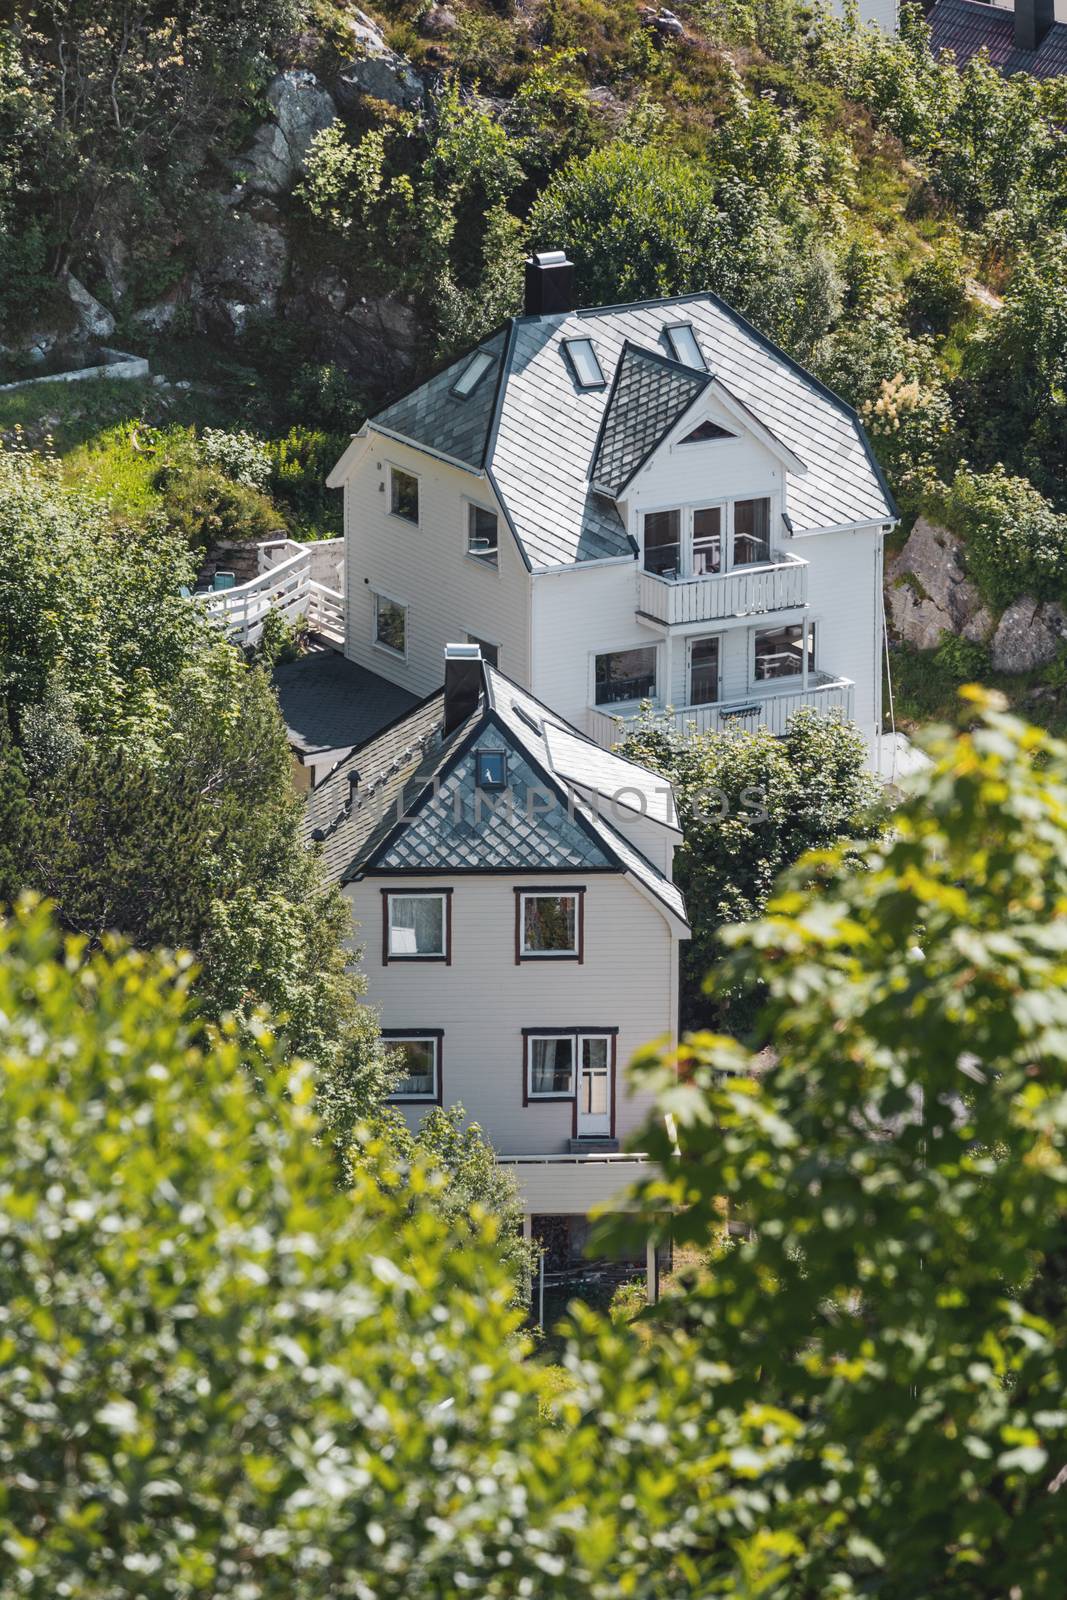 Two white houses in the middle of lush greenery in the suburb of Alesund. Norway.